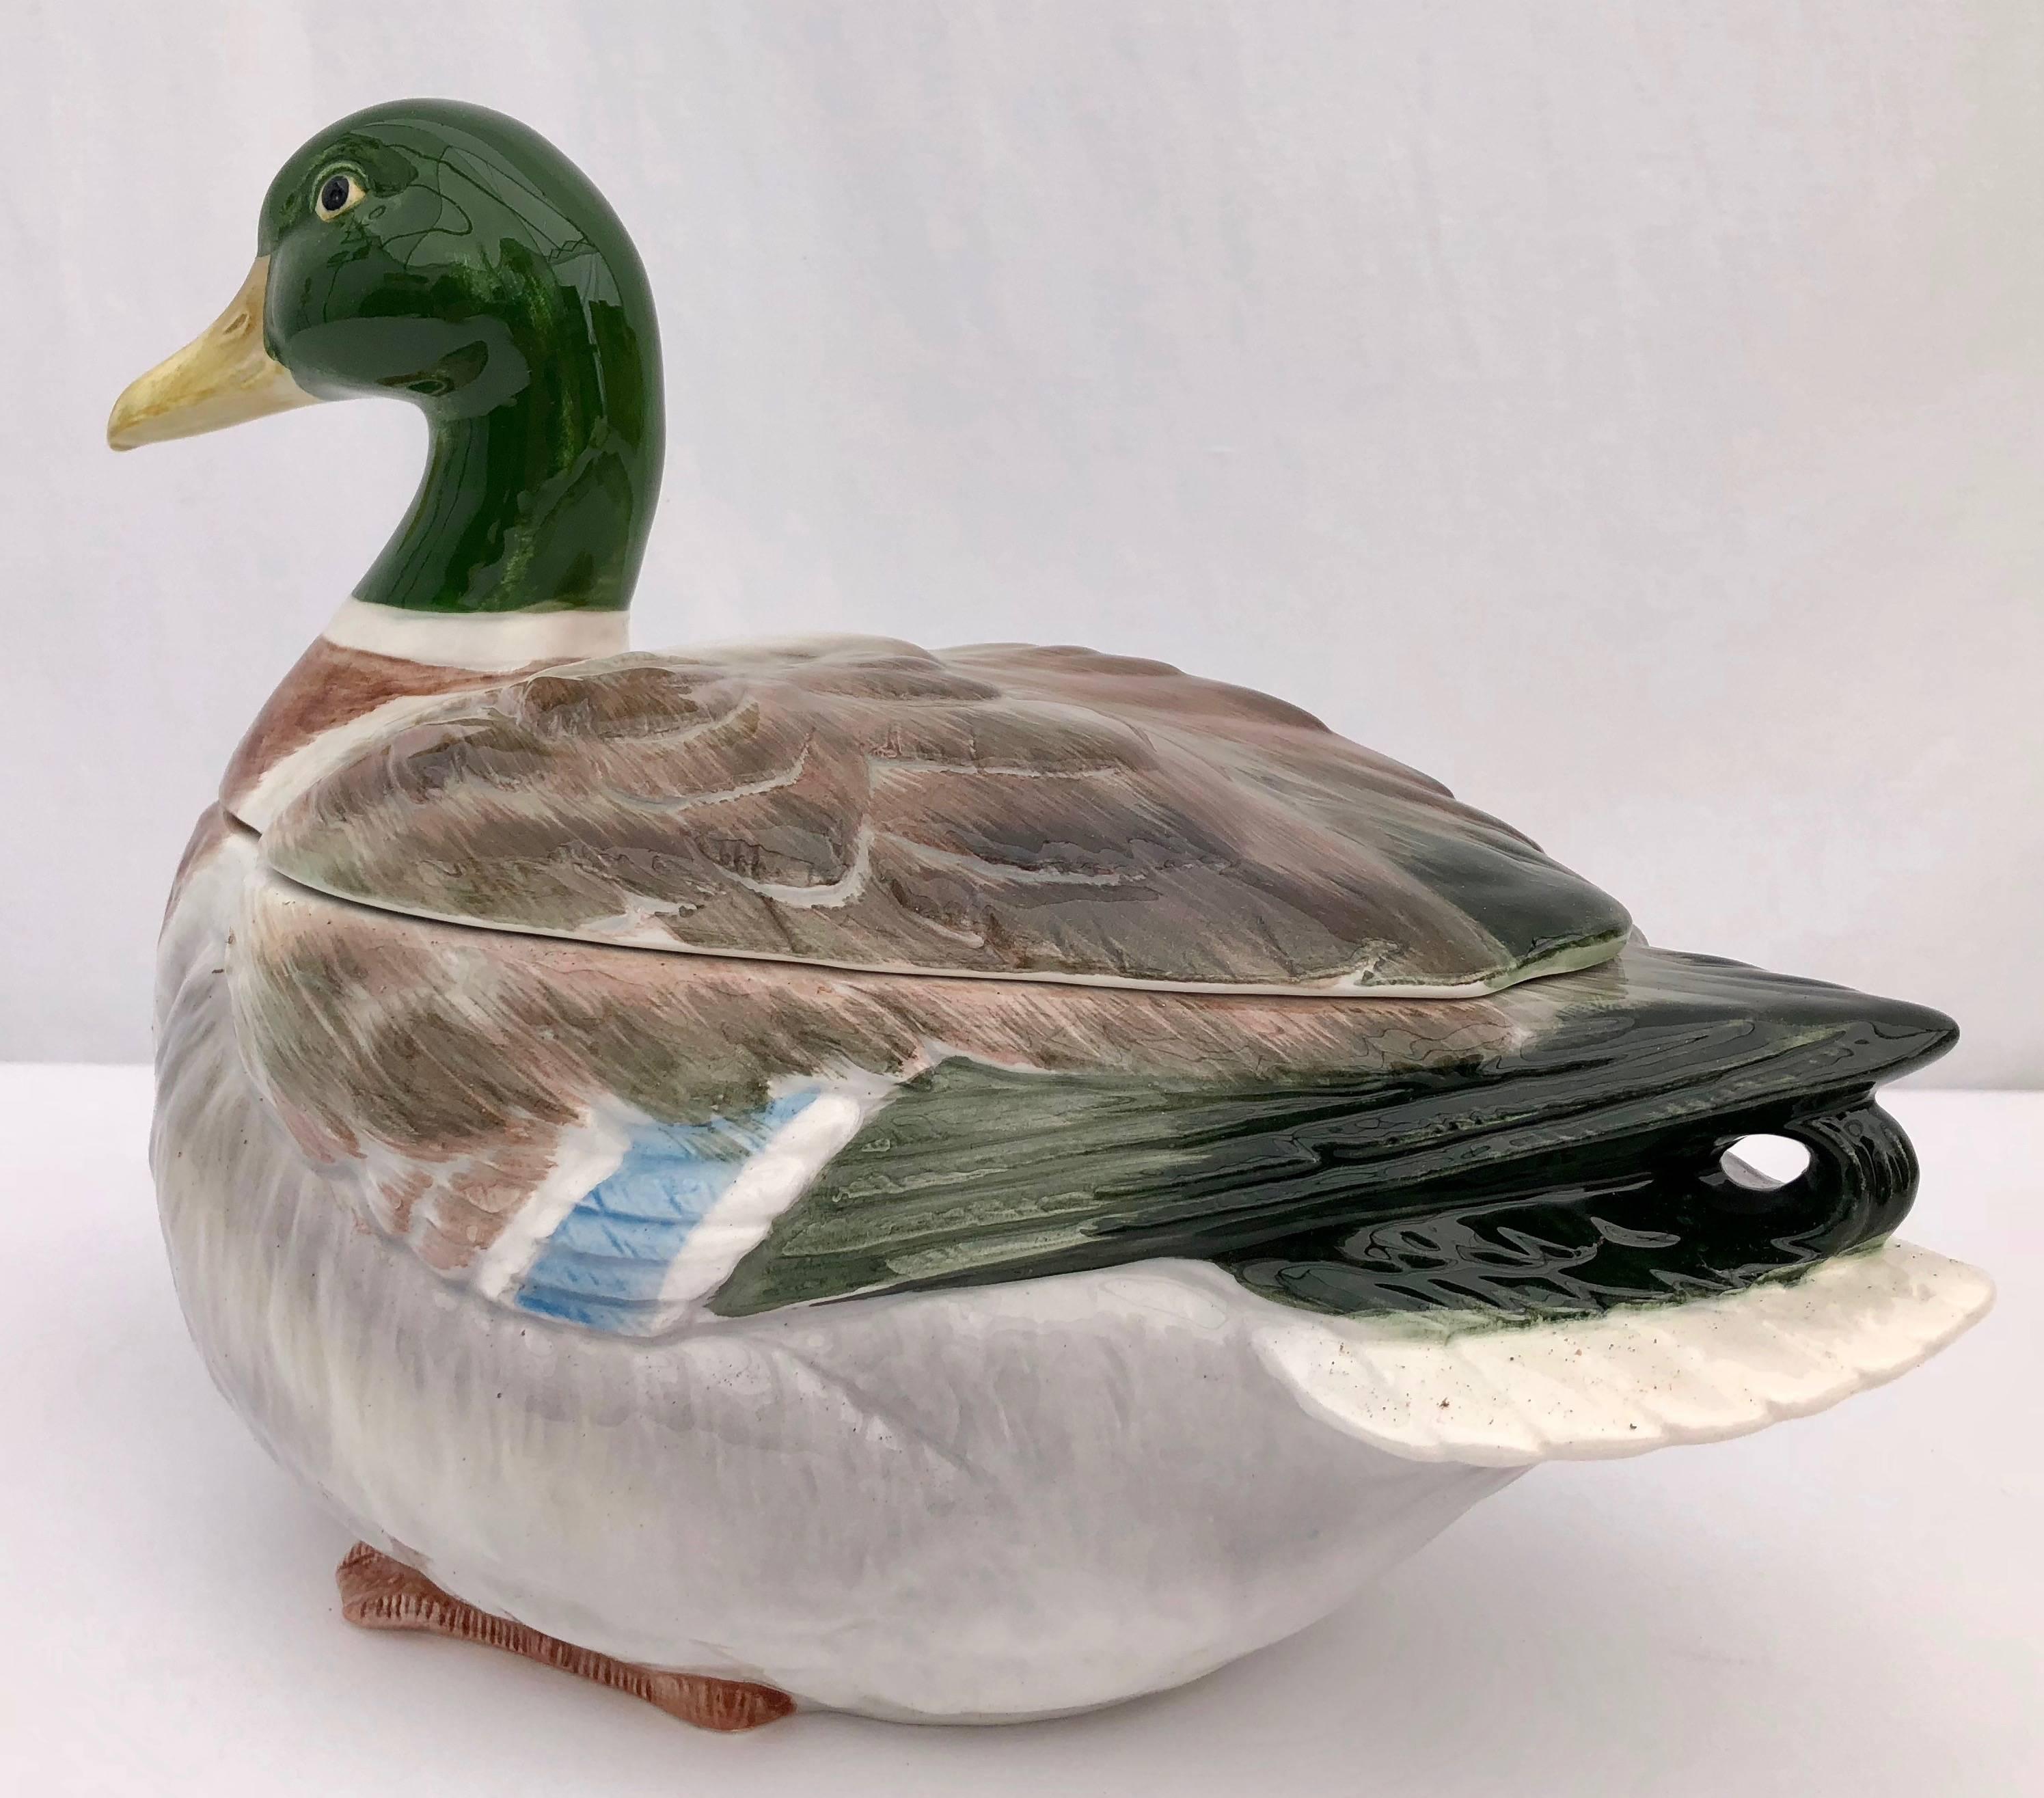 This is a handcrafted fantastic ceramic mallard cookie jar, by Otagiri, Japan. It was purchased for a French restaurant, but never used. It comes in its original box. The hand painted colors are vibrant. This would add a wonderful touch to any